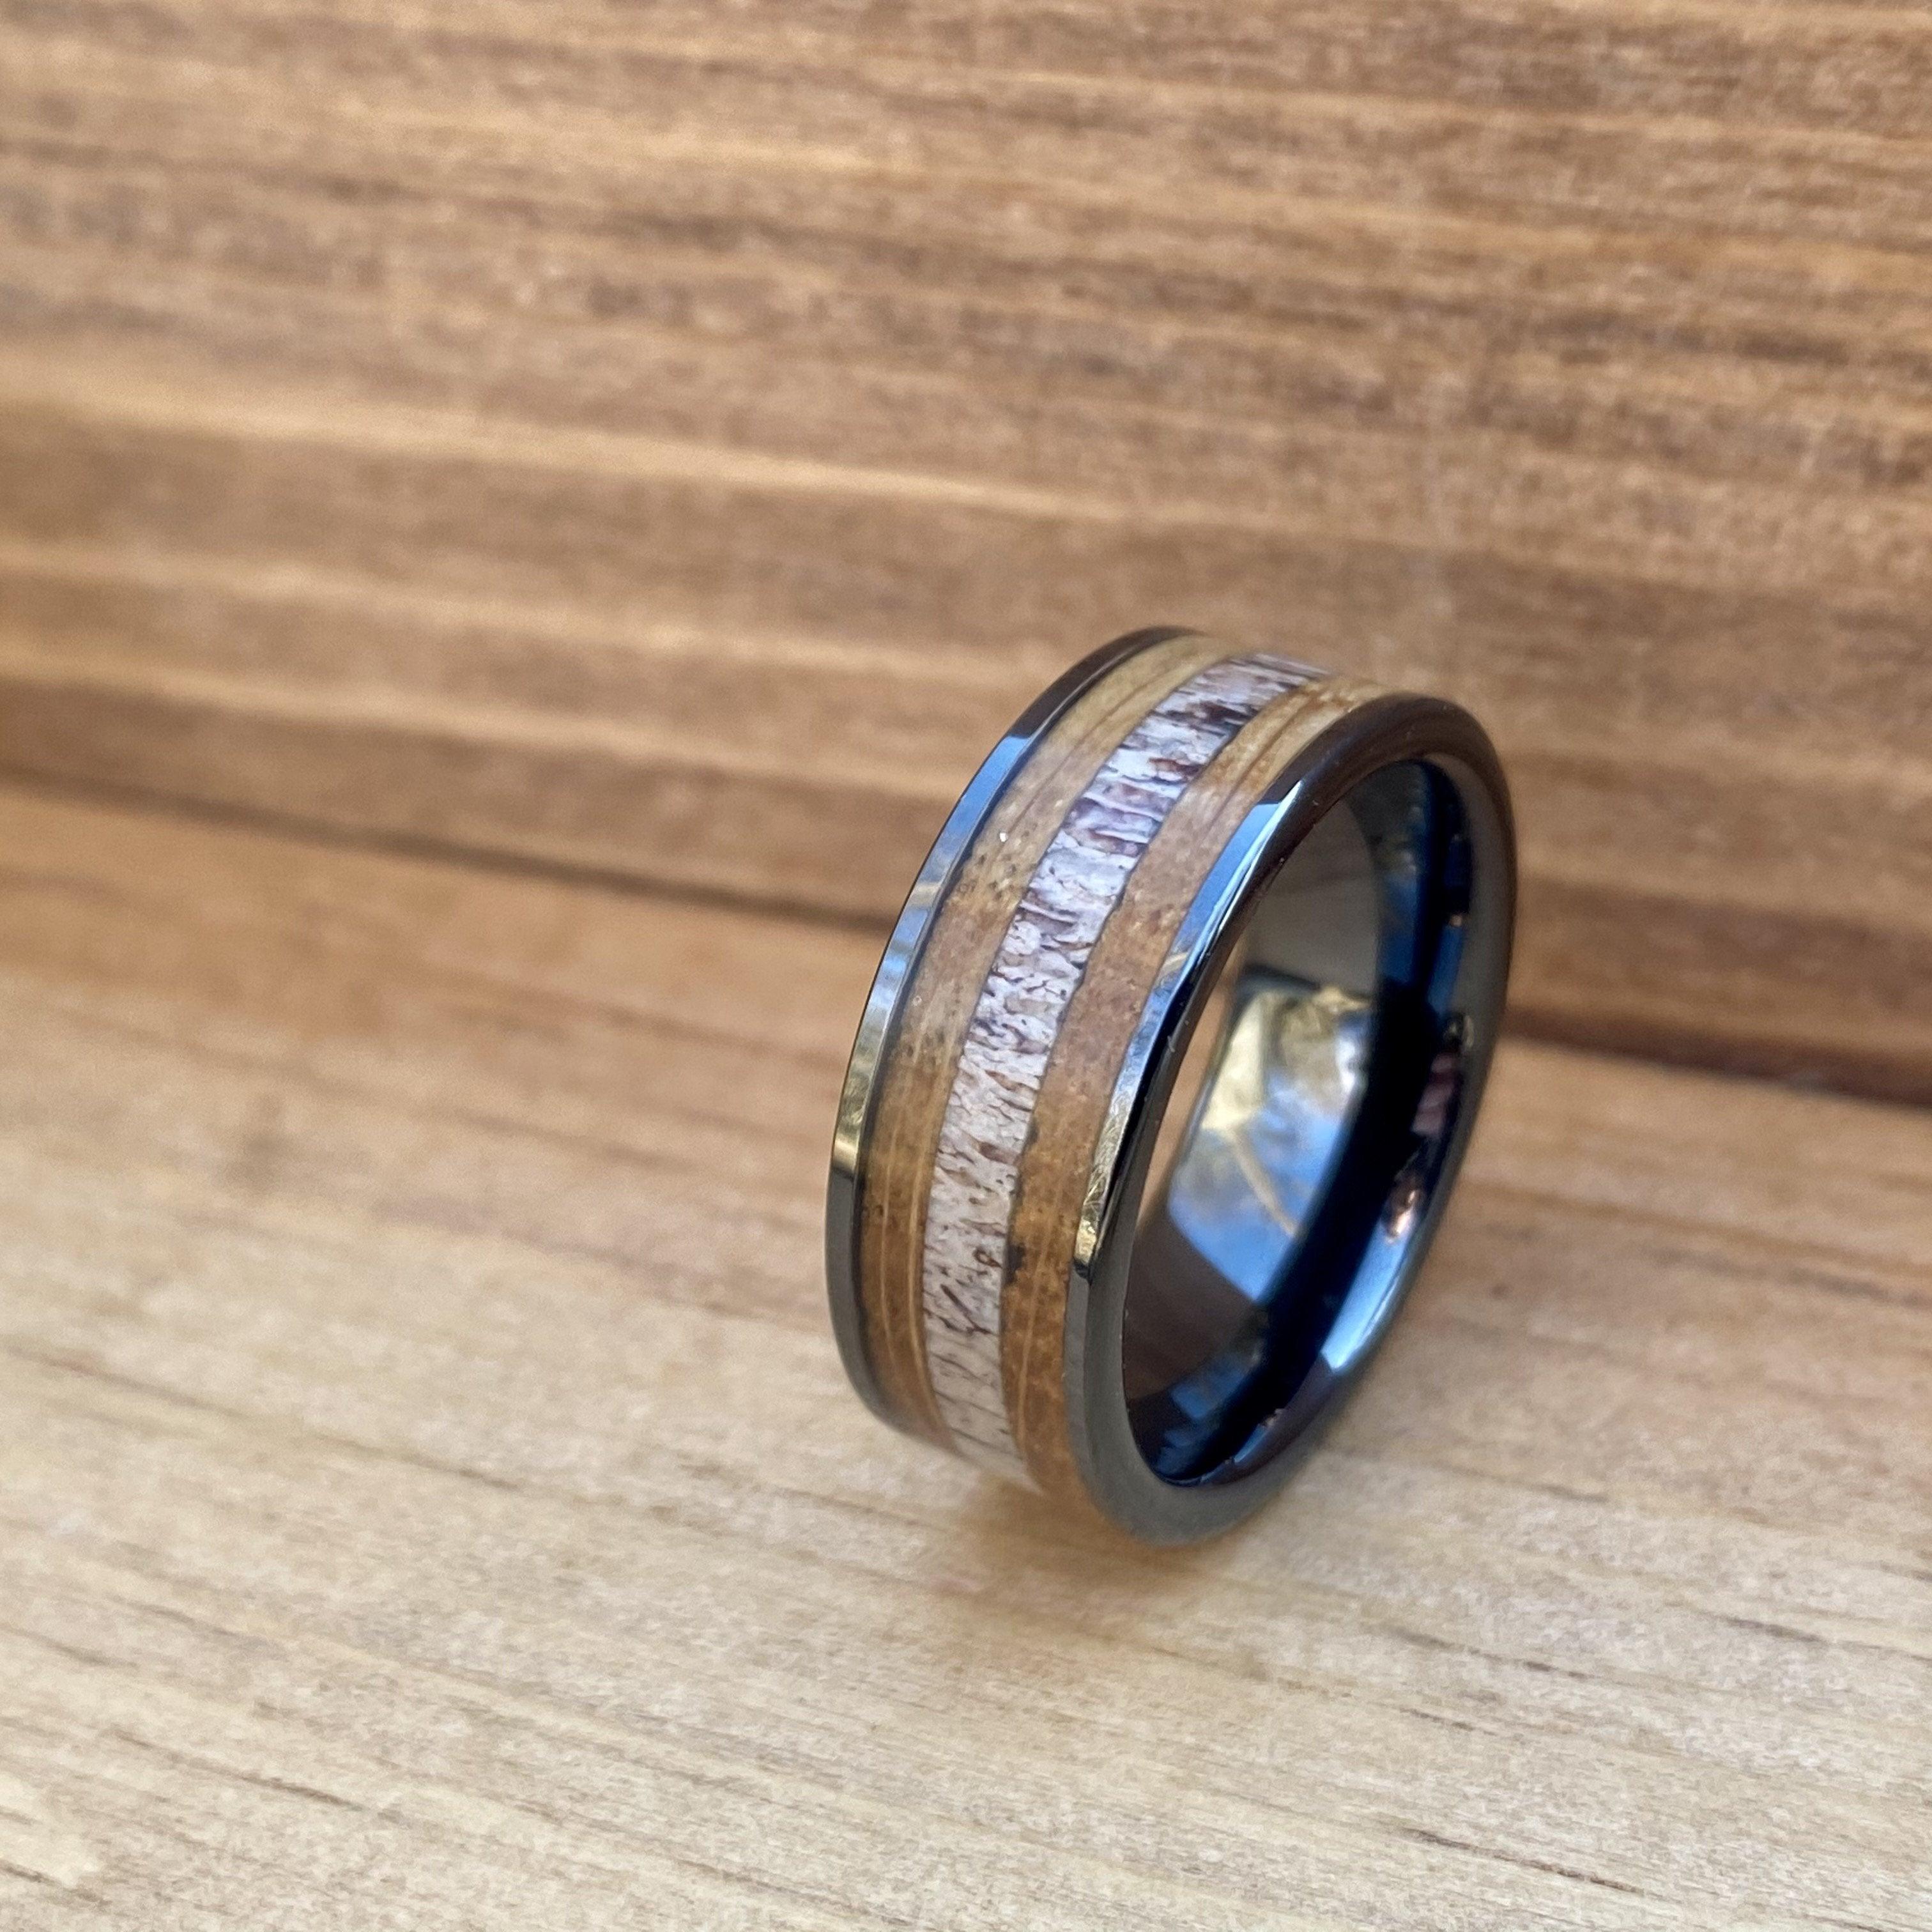 The Outdoorsman Black Ceramic Ring with Deer Antler and Bourbon Whiskey Barrel Wood 9 - BW James Jewelers